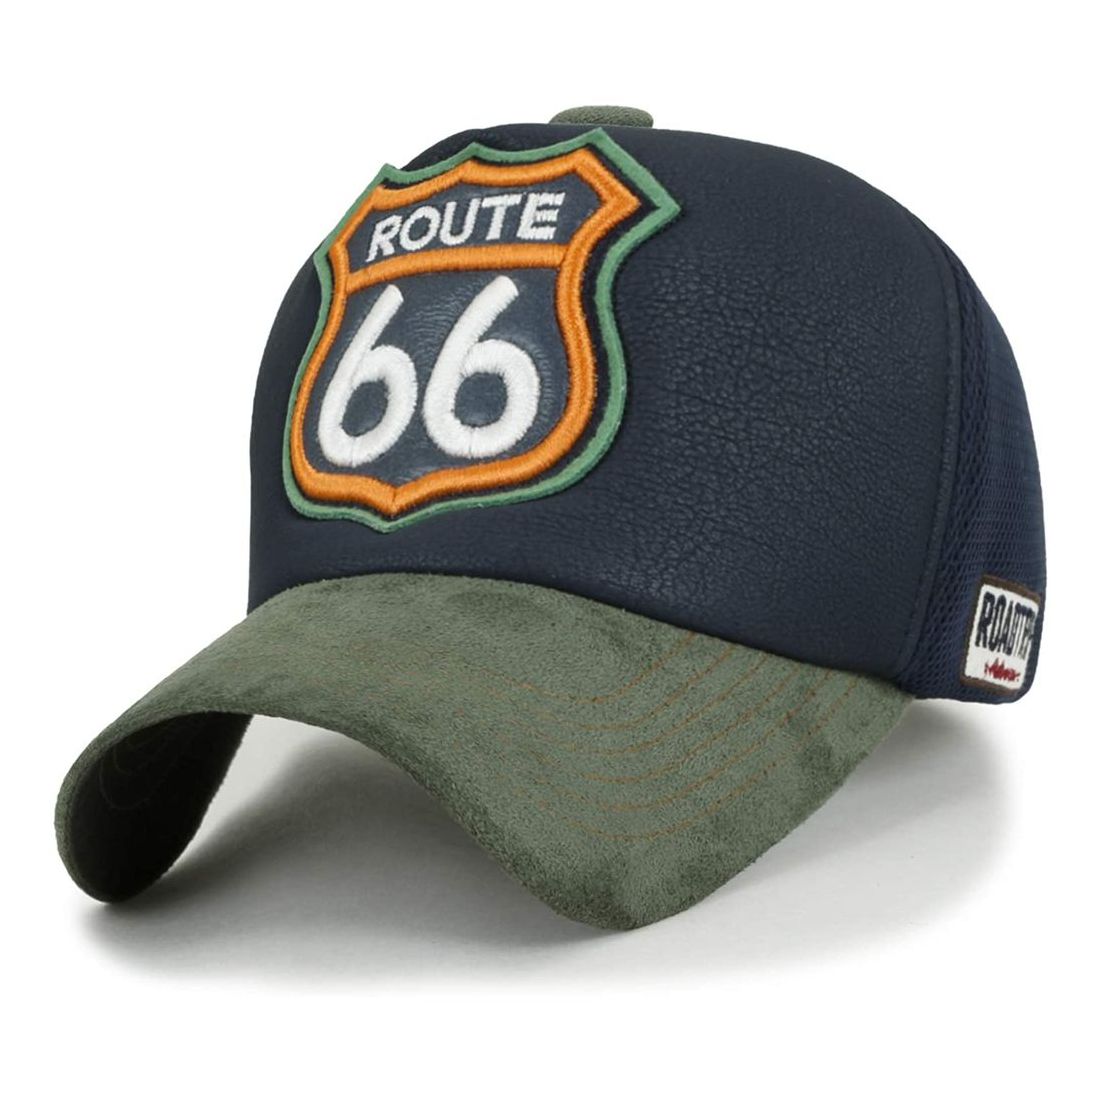 Ililiy Route 66 Embroidery Patch Mesh Baseball Trucker Cap Premium Limited Edition Green